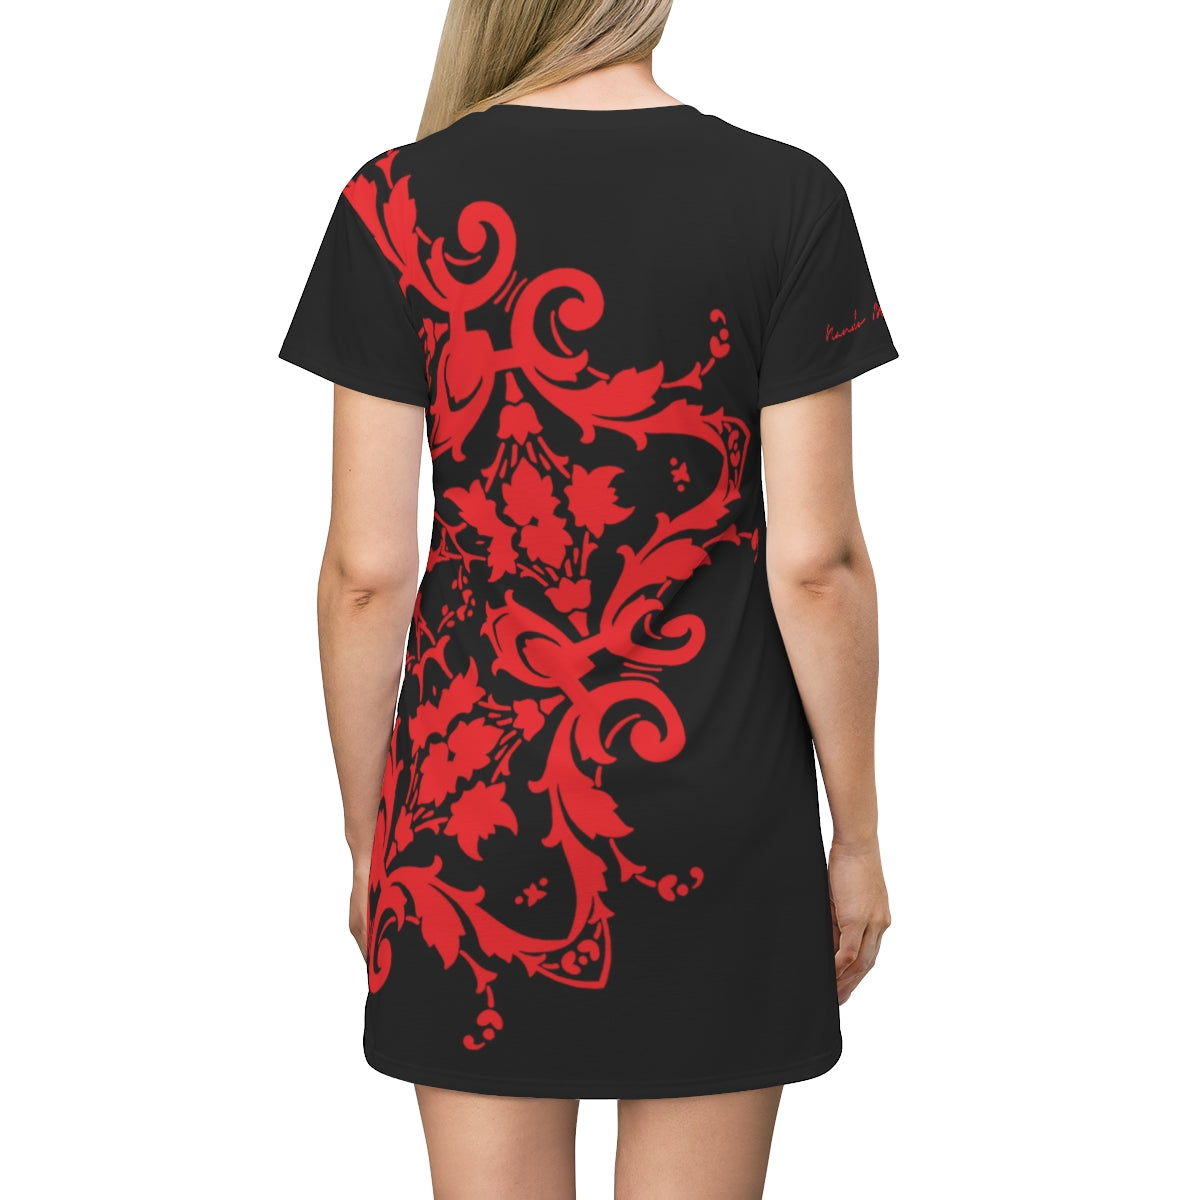 Shirtdress, Red Imperial Star